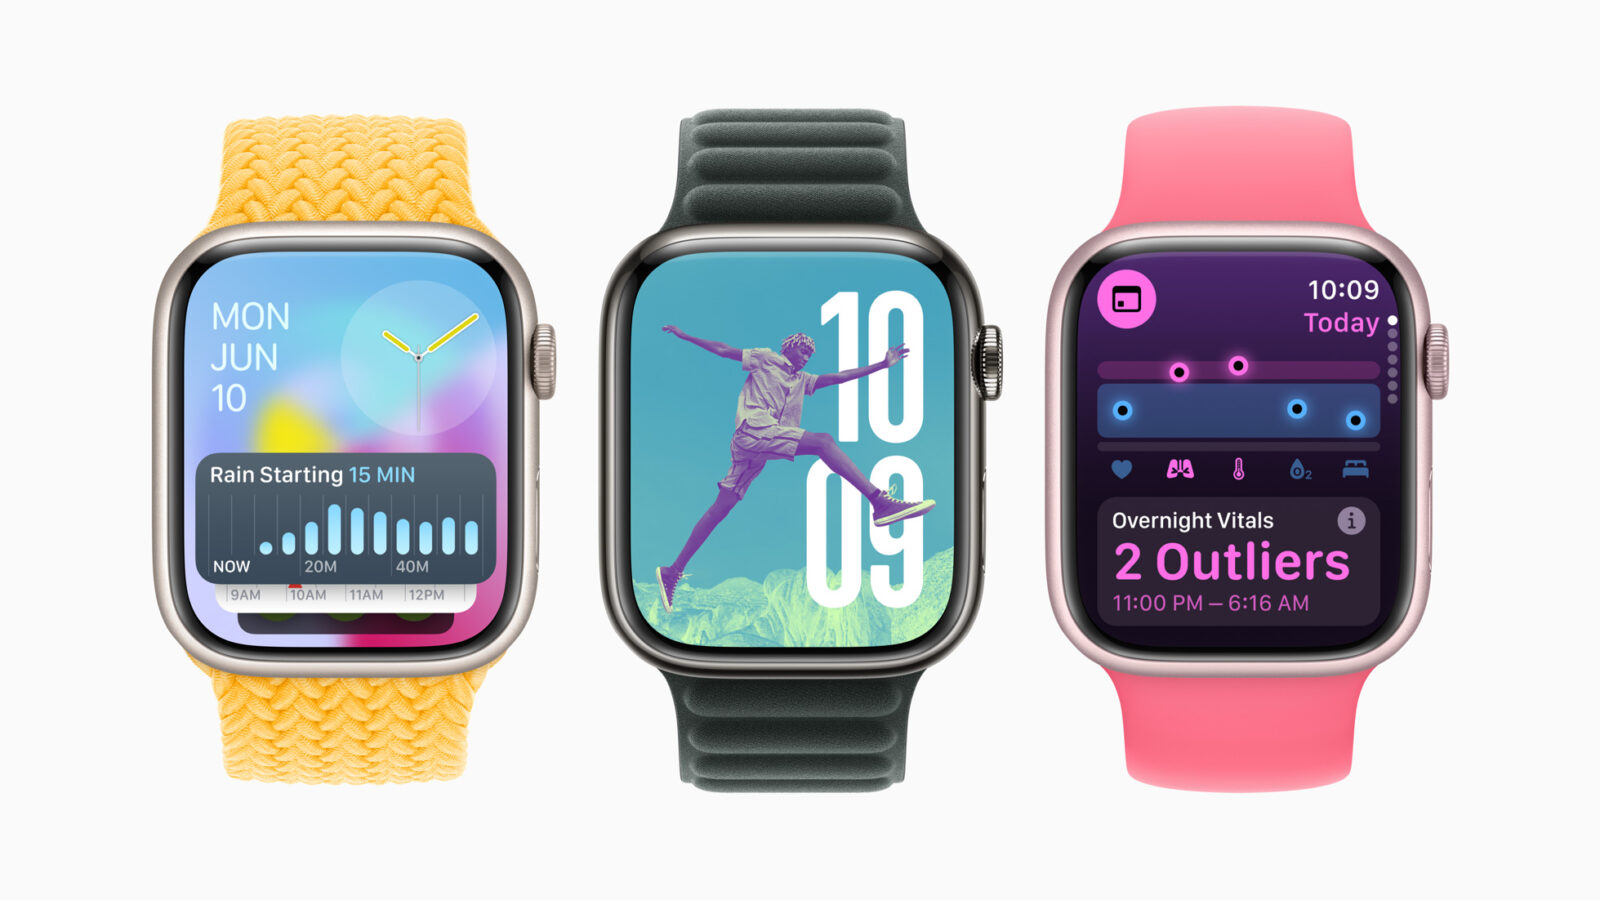 You can expect these new features on your Apple Watch